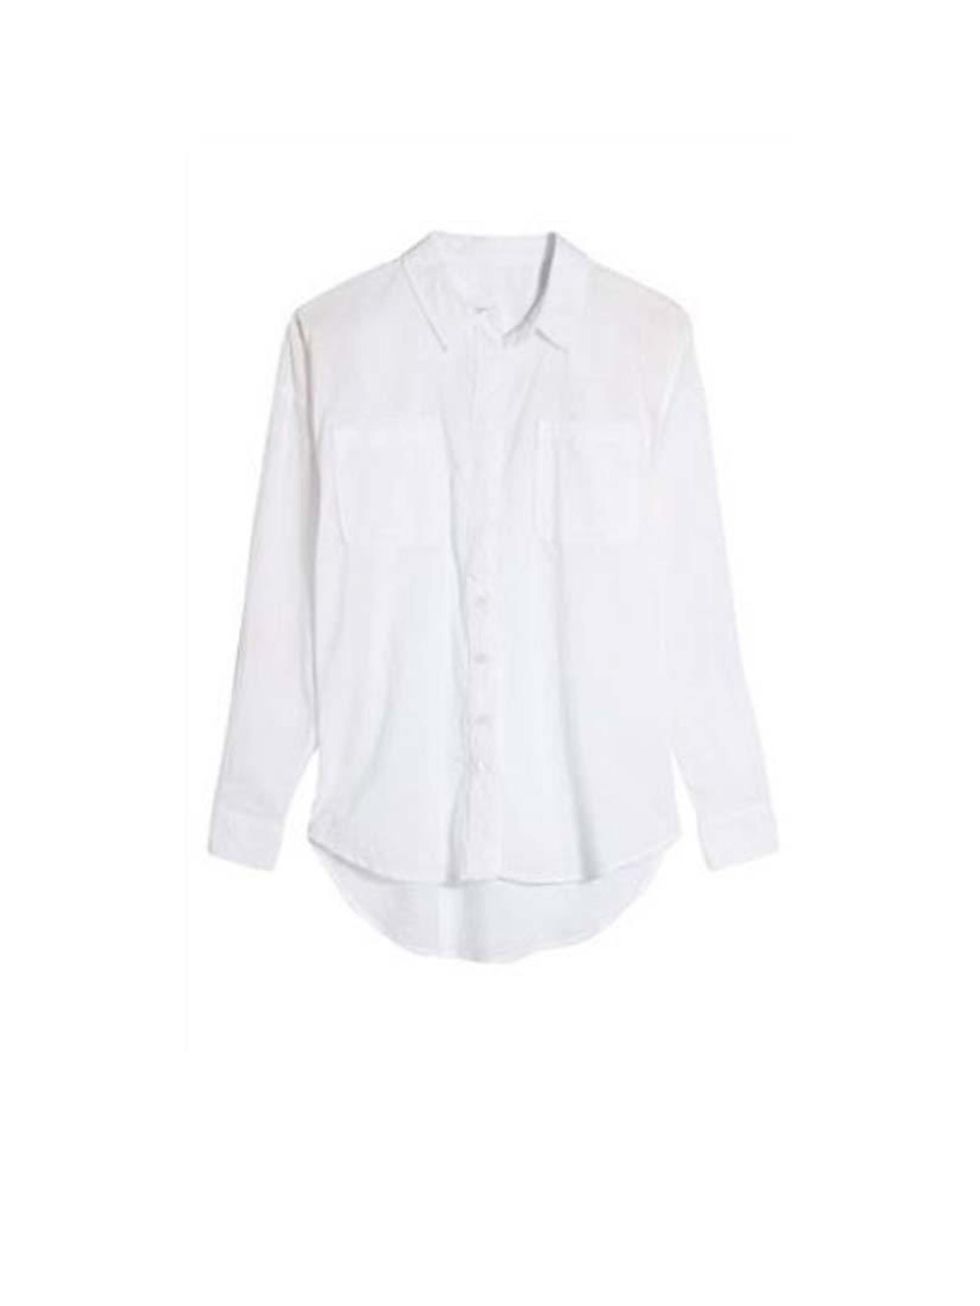 <p>A white crisp shirt for a casual chic look</p>

<p><a href="http://www.next.co.uk/x54146s1#664020x54">Next</a>, from £22</p>